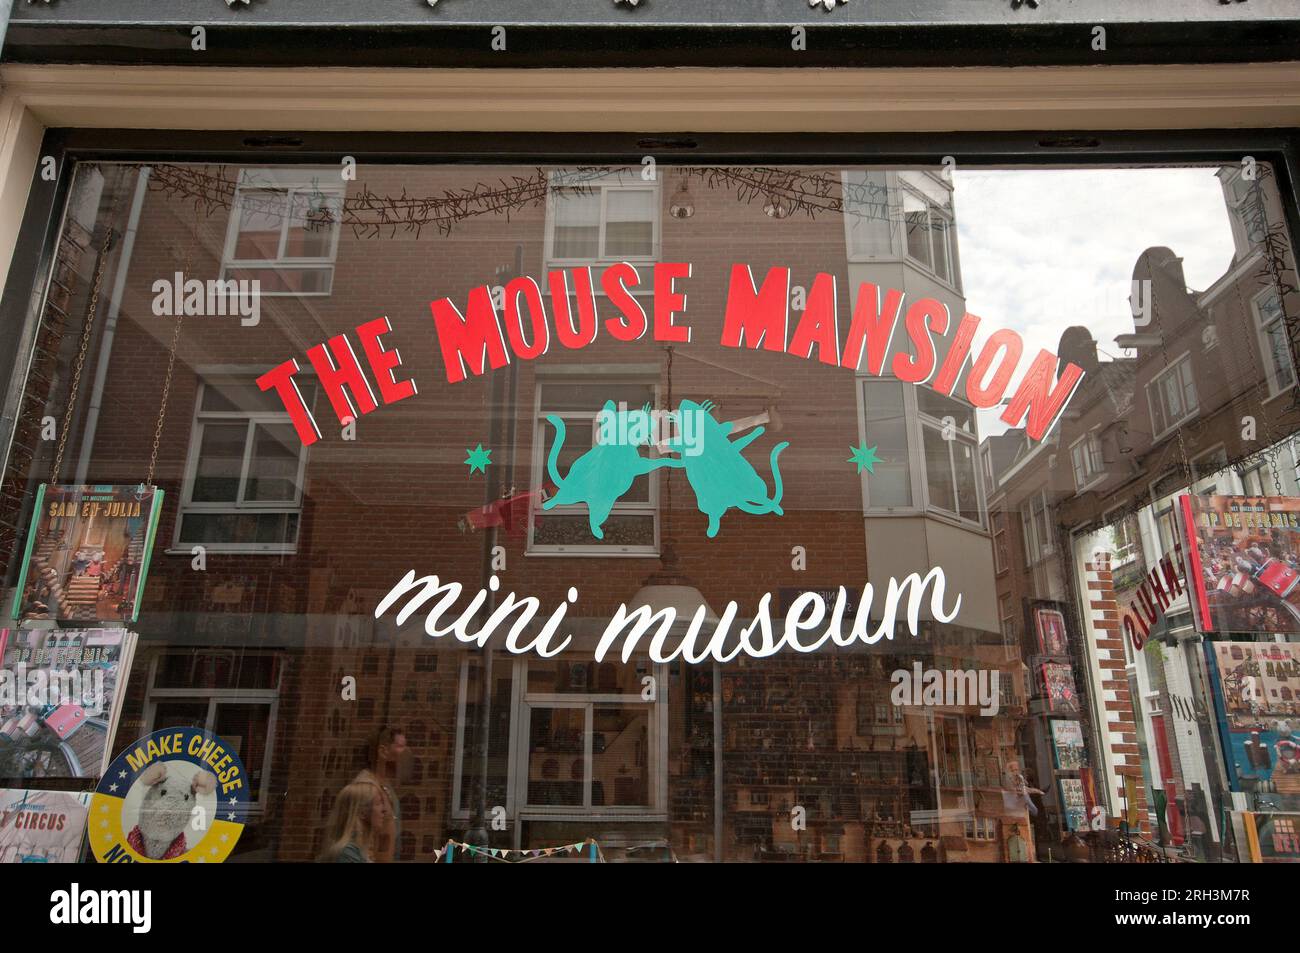 The Mouse Mansion Mini Museum in the city center of Amsterdam, Netherlands Stock Photo